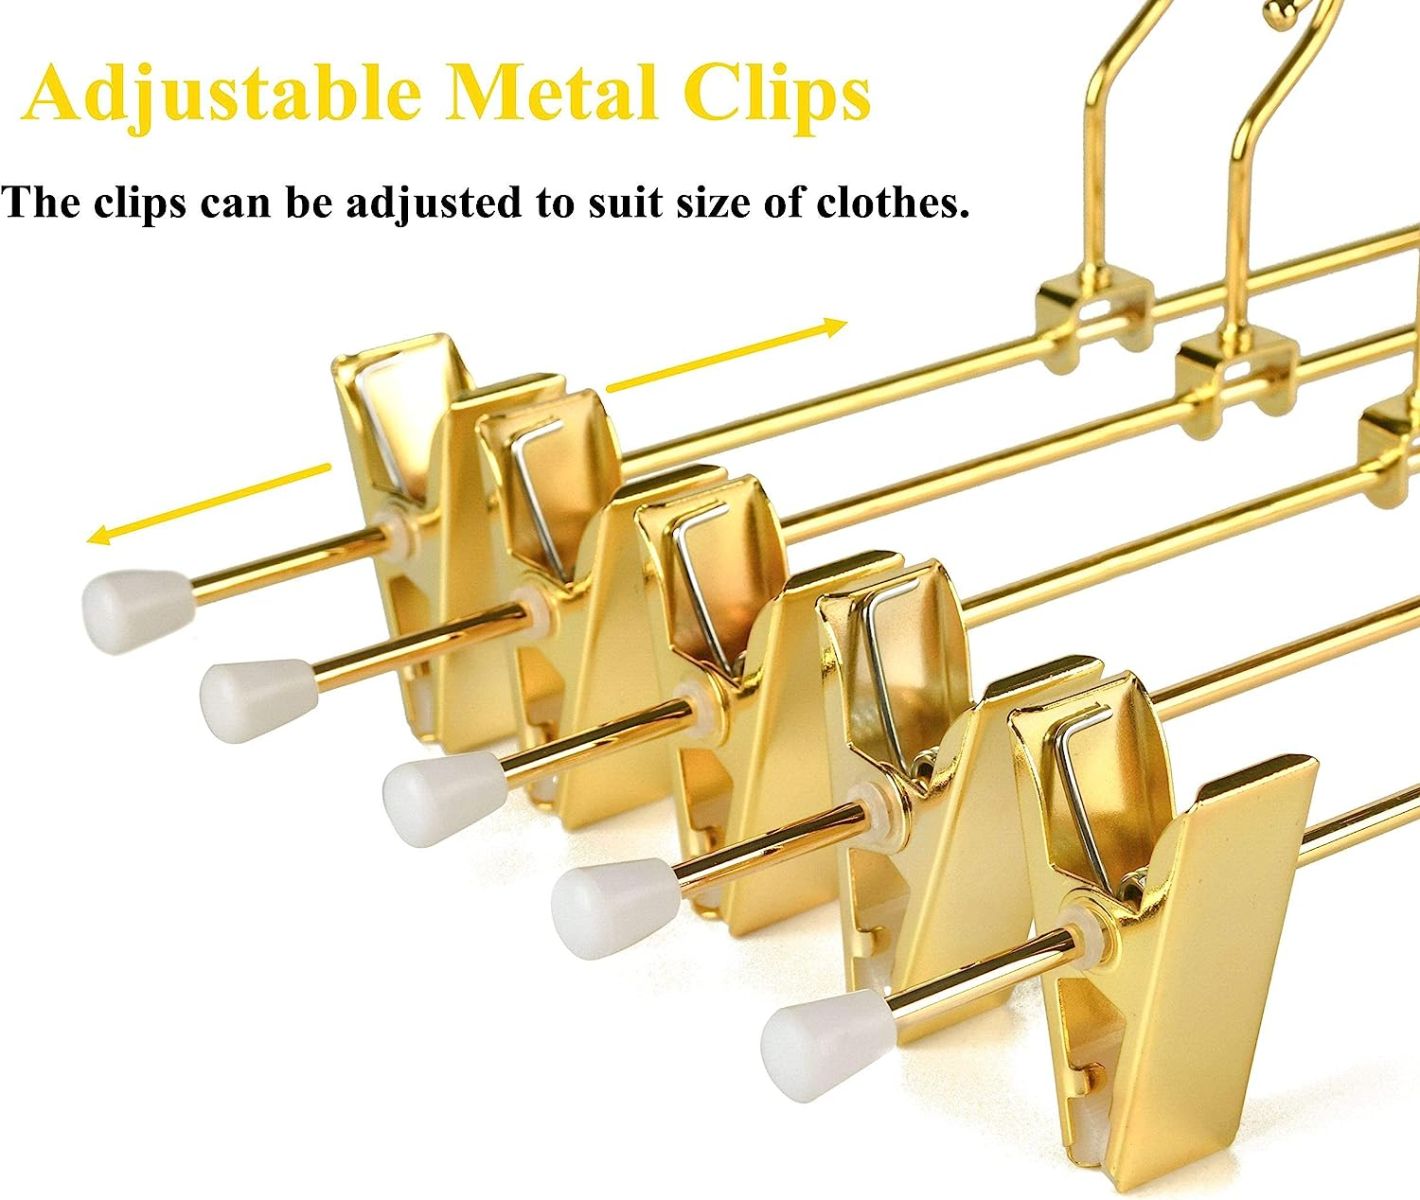 Amber Home Shiny Gold 12 Inch Metal Pants Skirts Hanger 10 Pack, Sturdy for Slacks Trousers with 2 Adjustable Non Slip Clips and Swivel Hook (10 Pack)